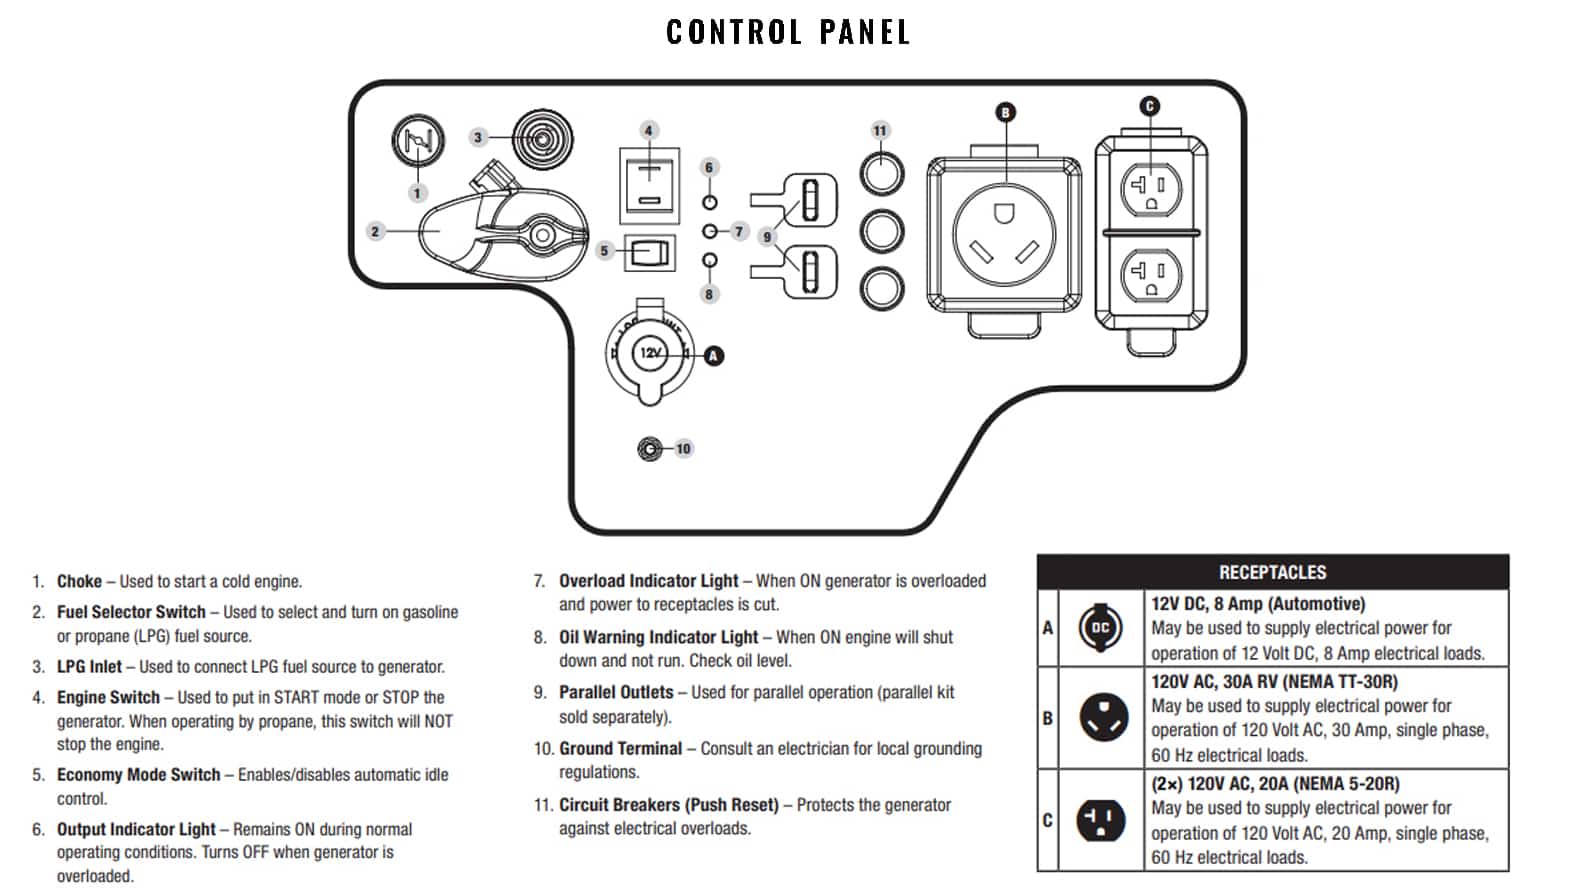 Control Panel Details of the Champion 100574 Portable Generator